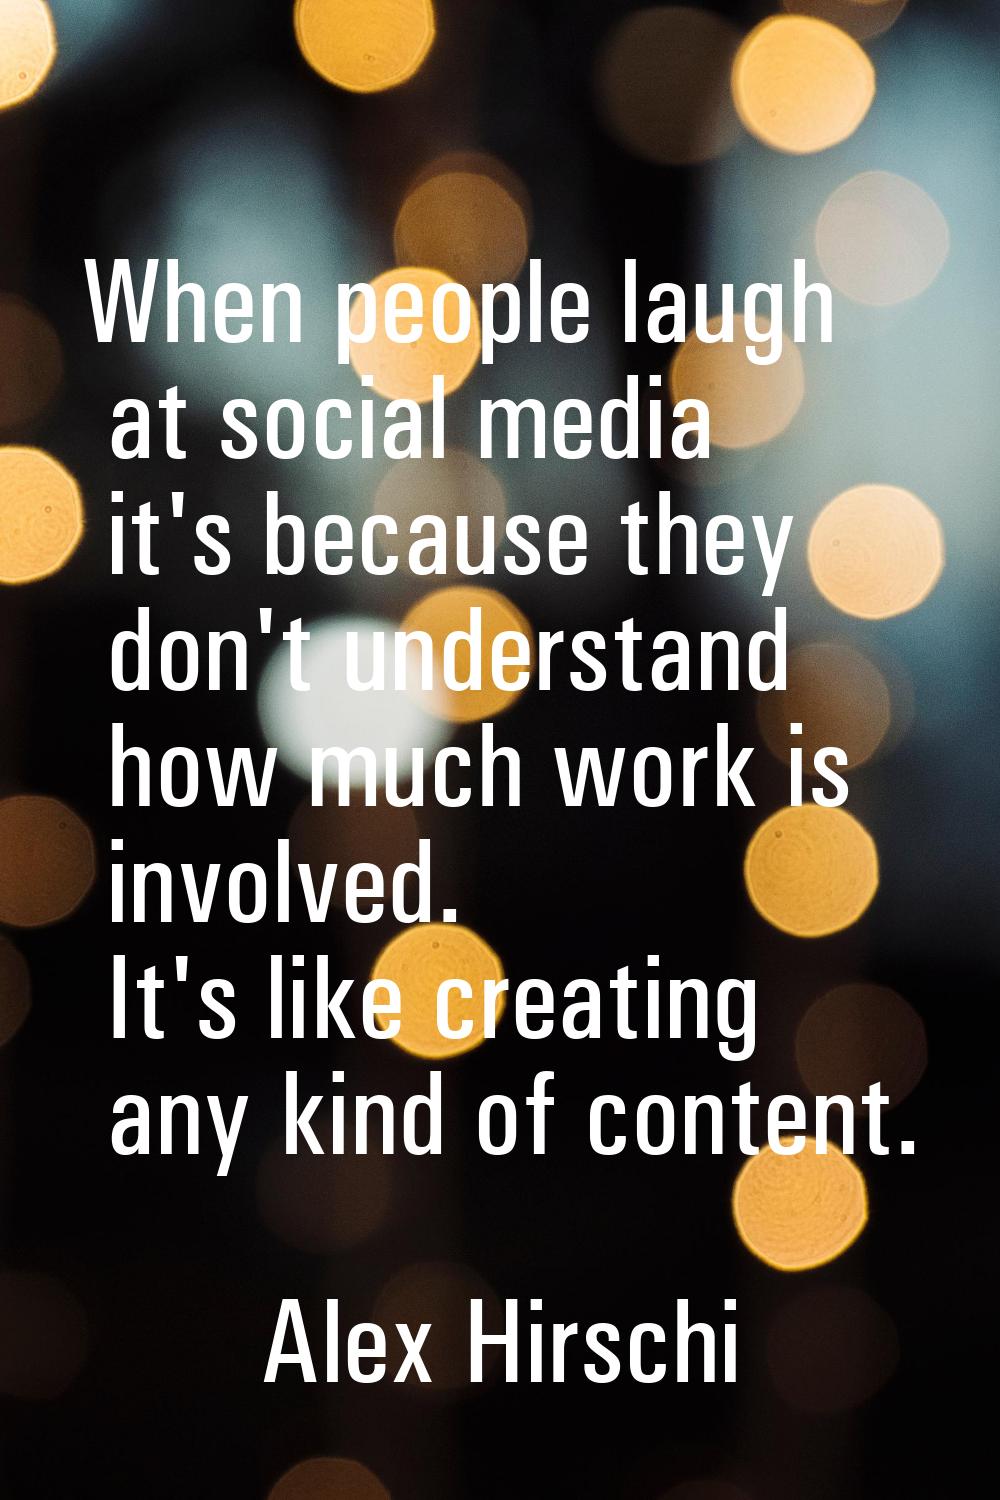 When people laugh at social media it's because they don't understand how much work is involved. It'